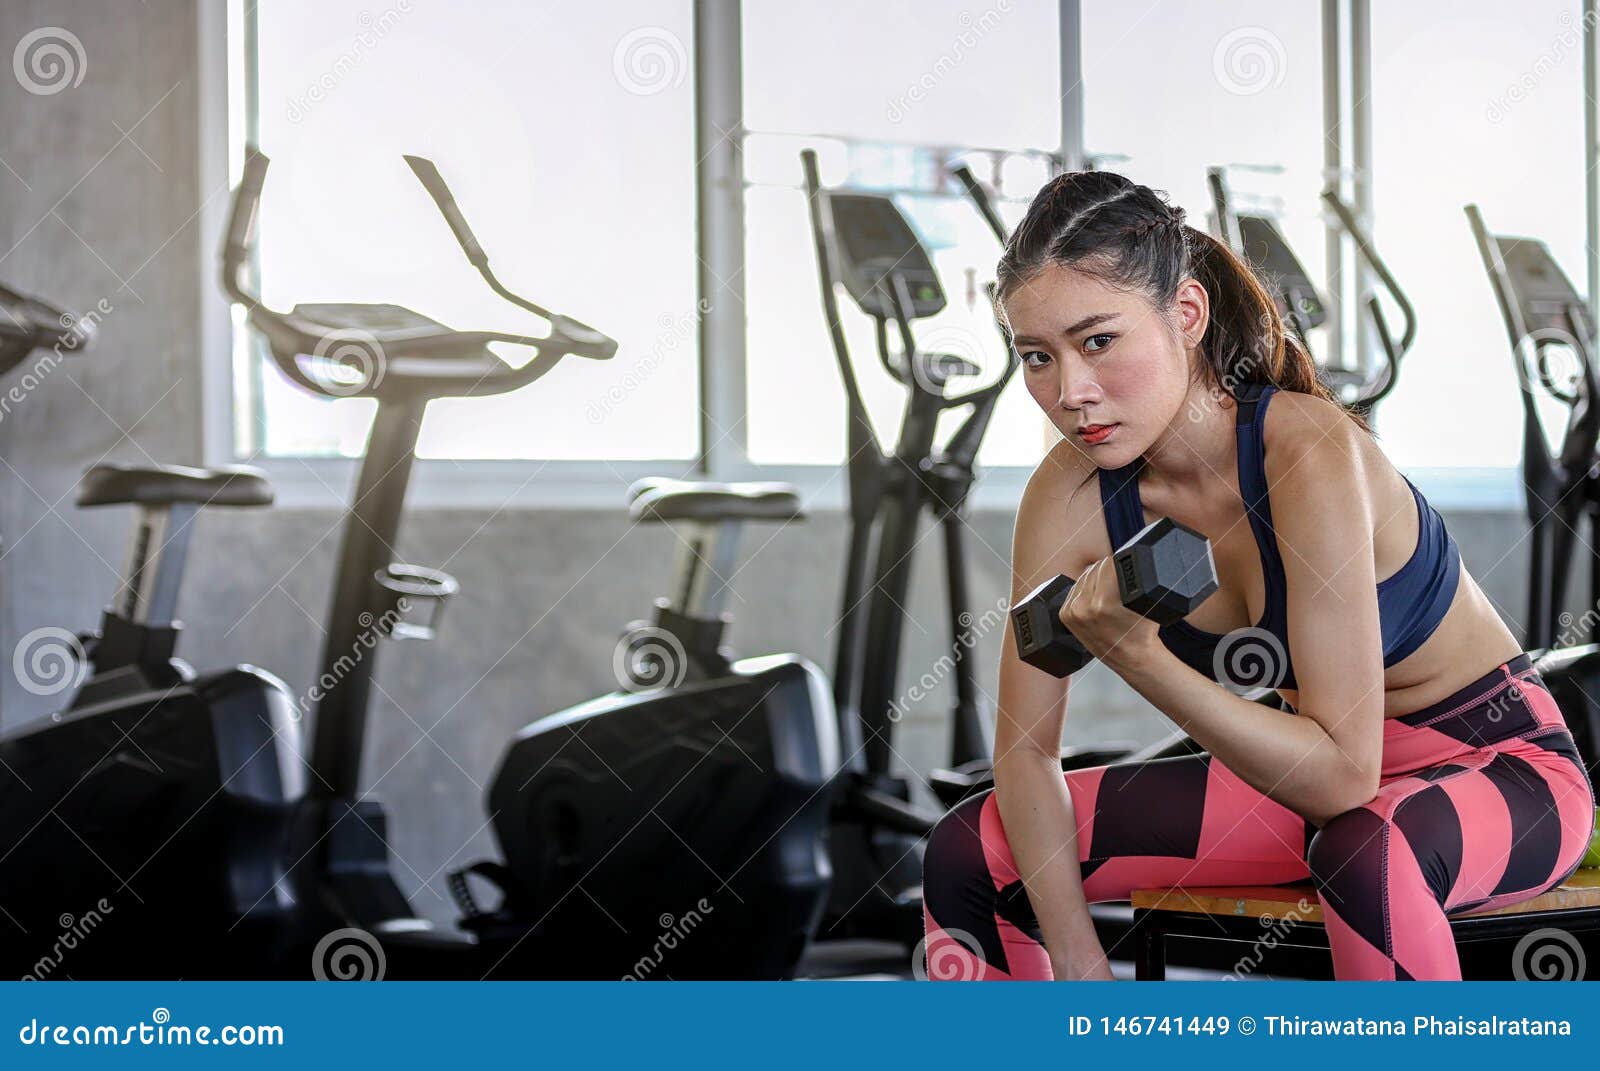 Concept Fitness Sport Training Lifestyle Girl Lifting Dumbbells Stock Image Image Of